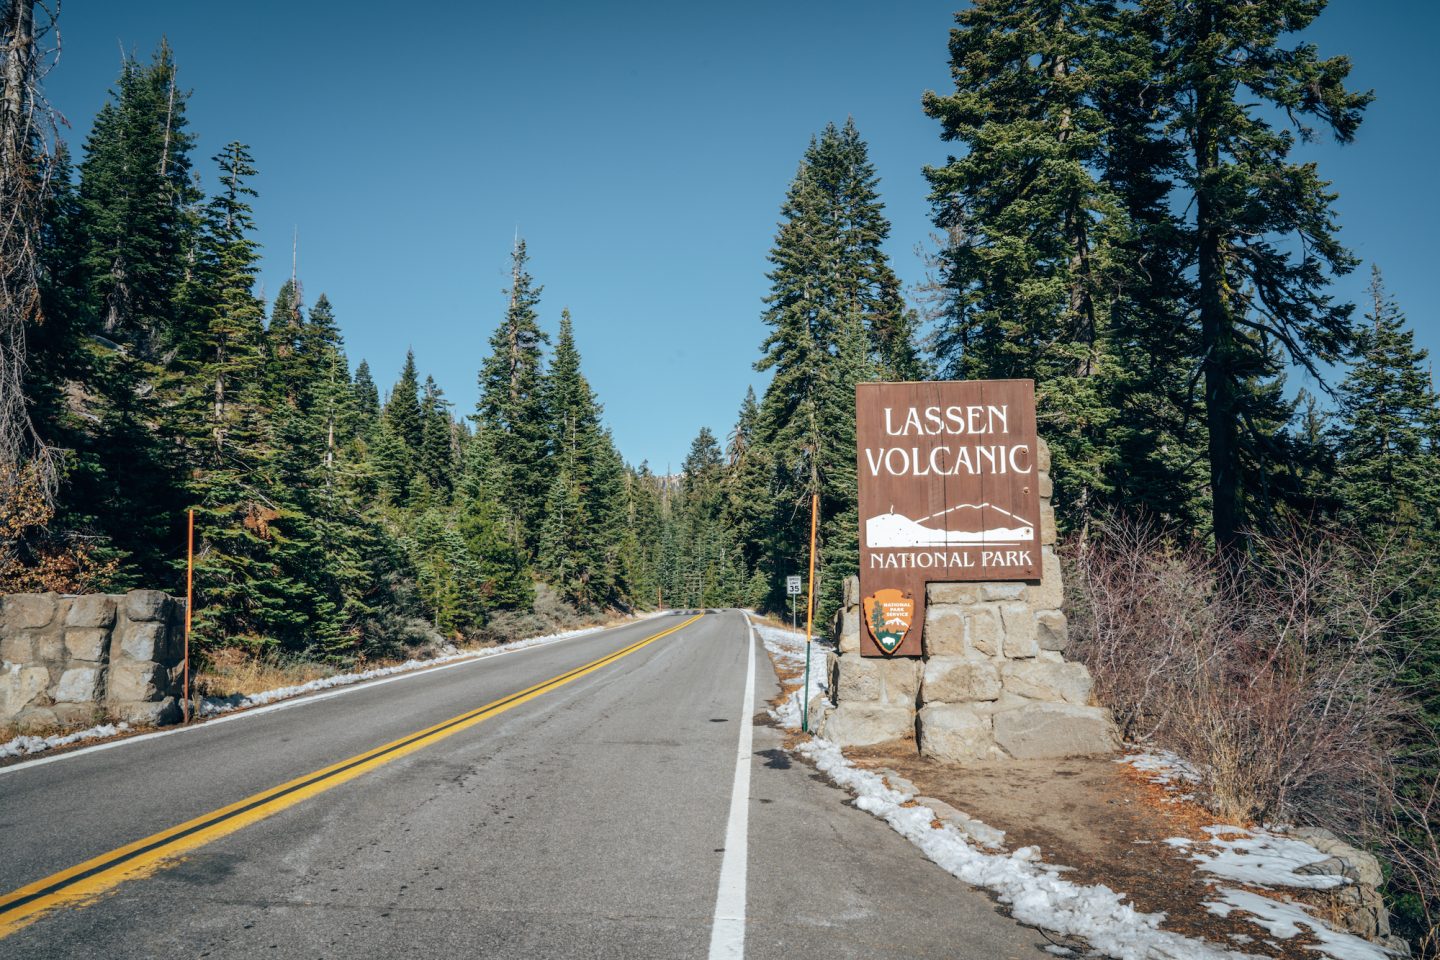 Entrance to Lassen Volcanic National Park - Califiornia